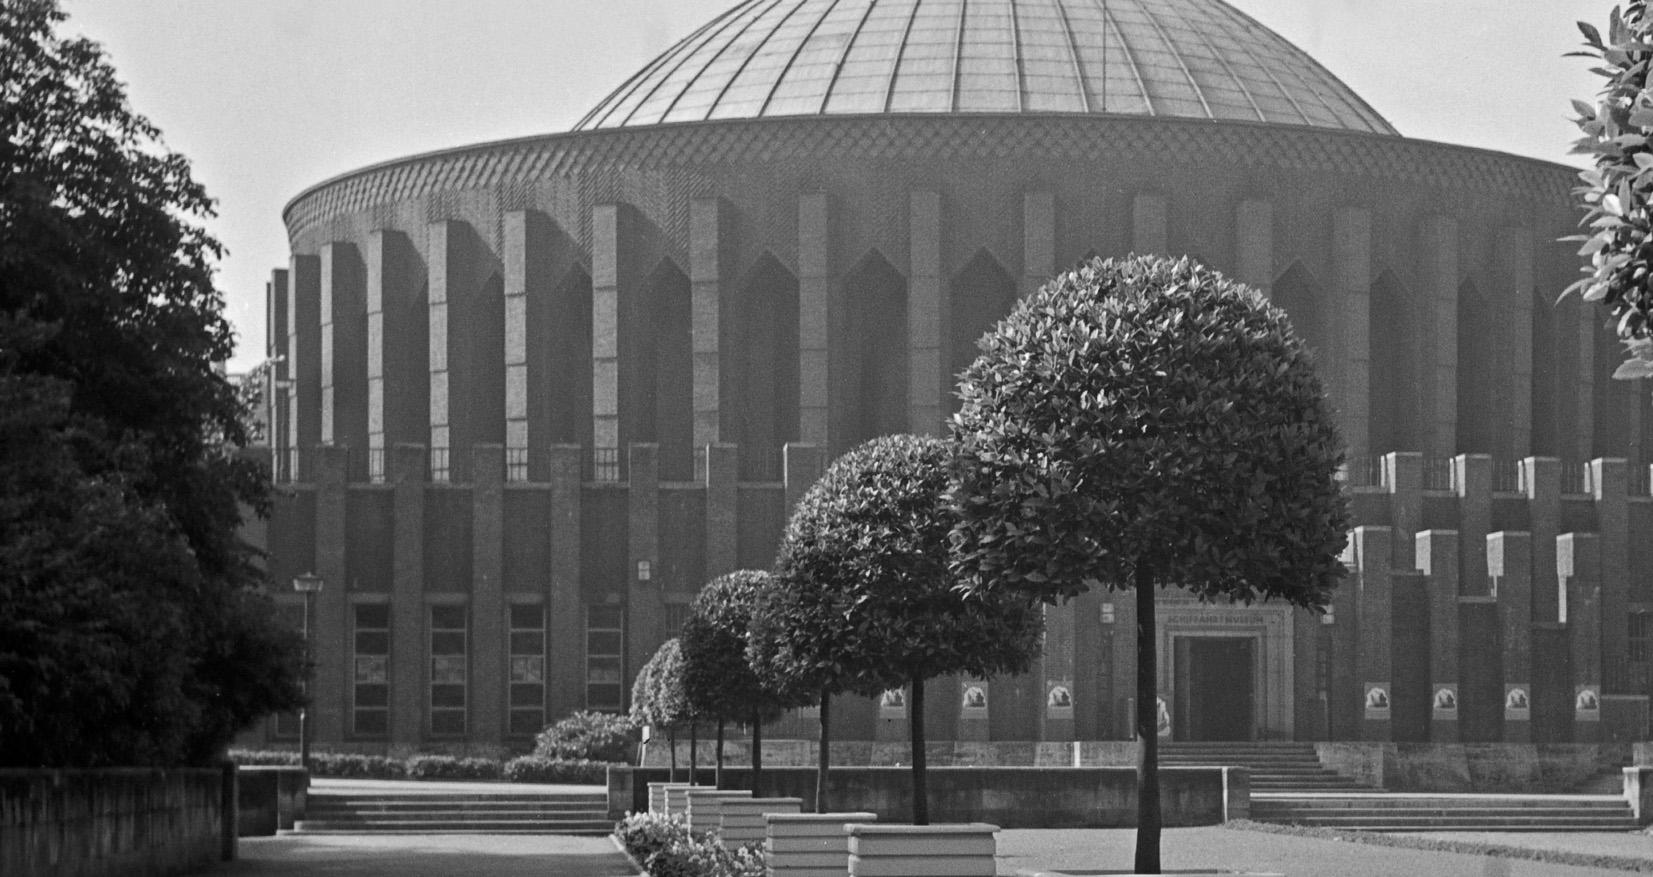 Duesseldorf planetarium and Shipping Museum, Germany 1937 Printed Later  - Photograph by Karl Heinrich Lämmel